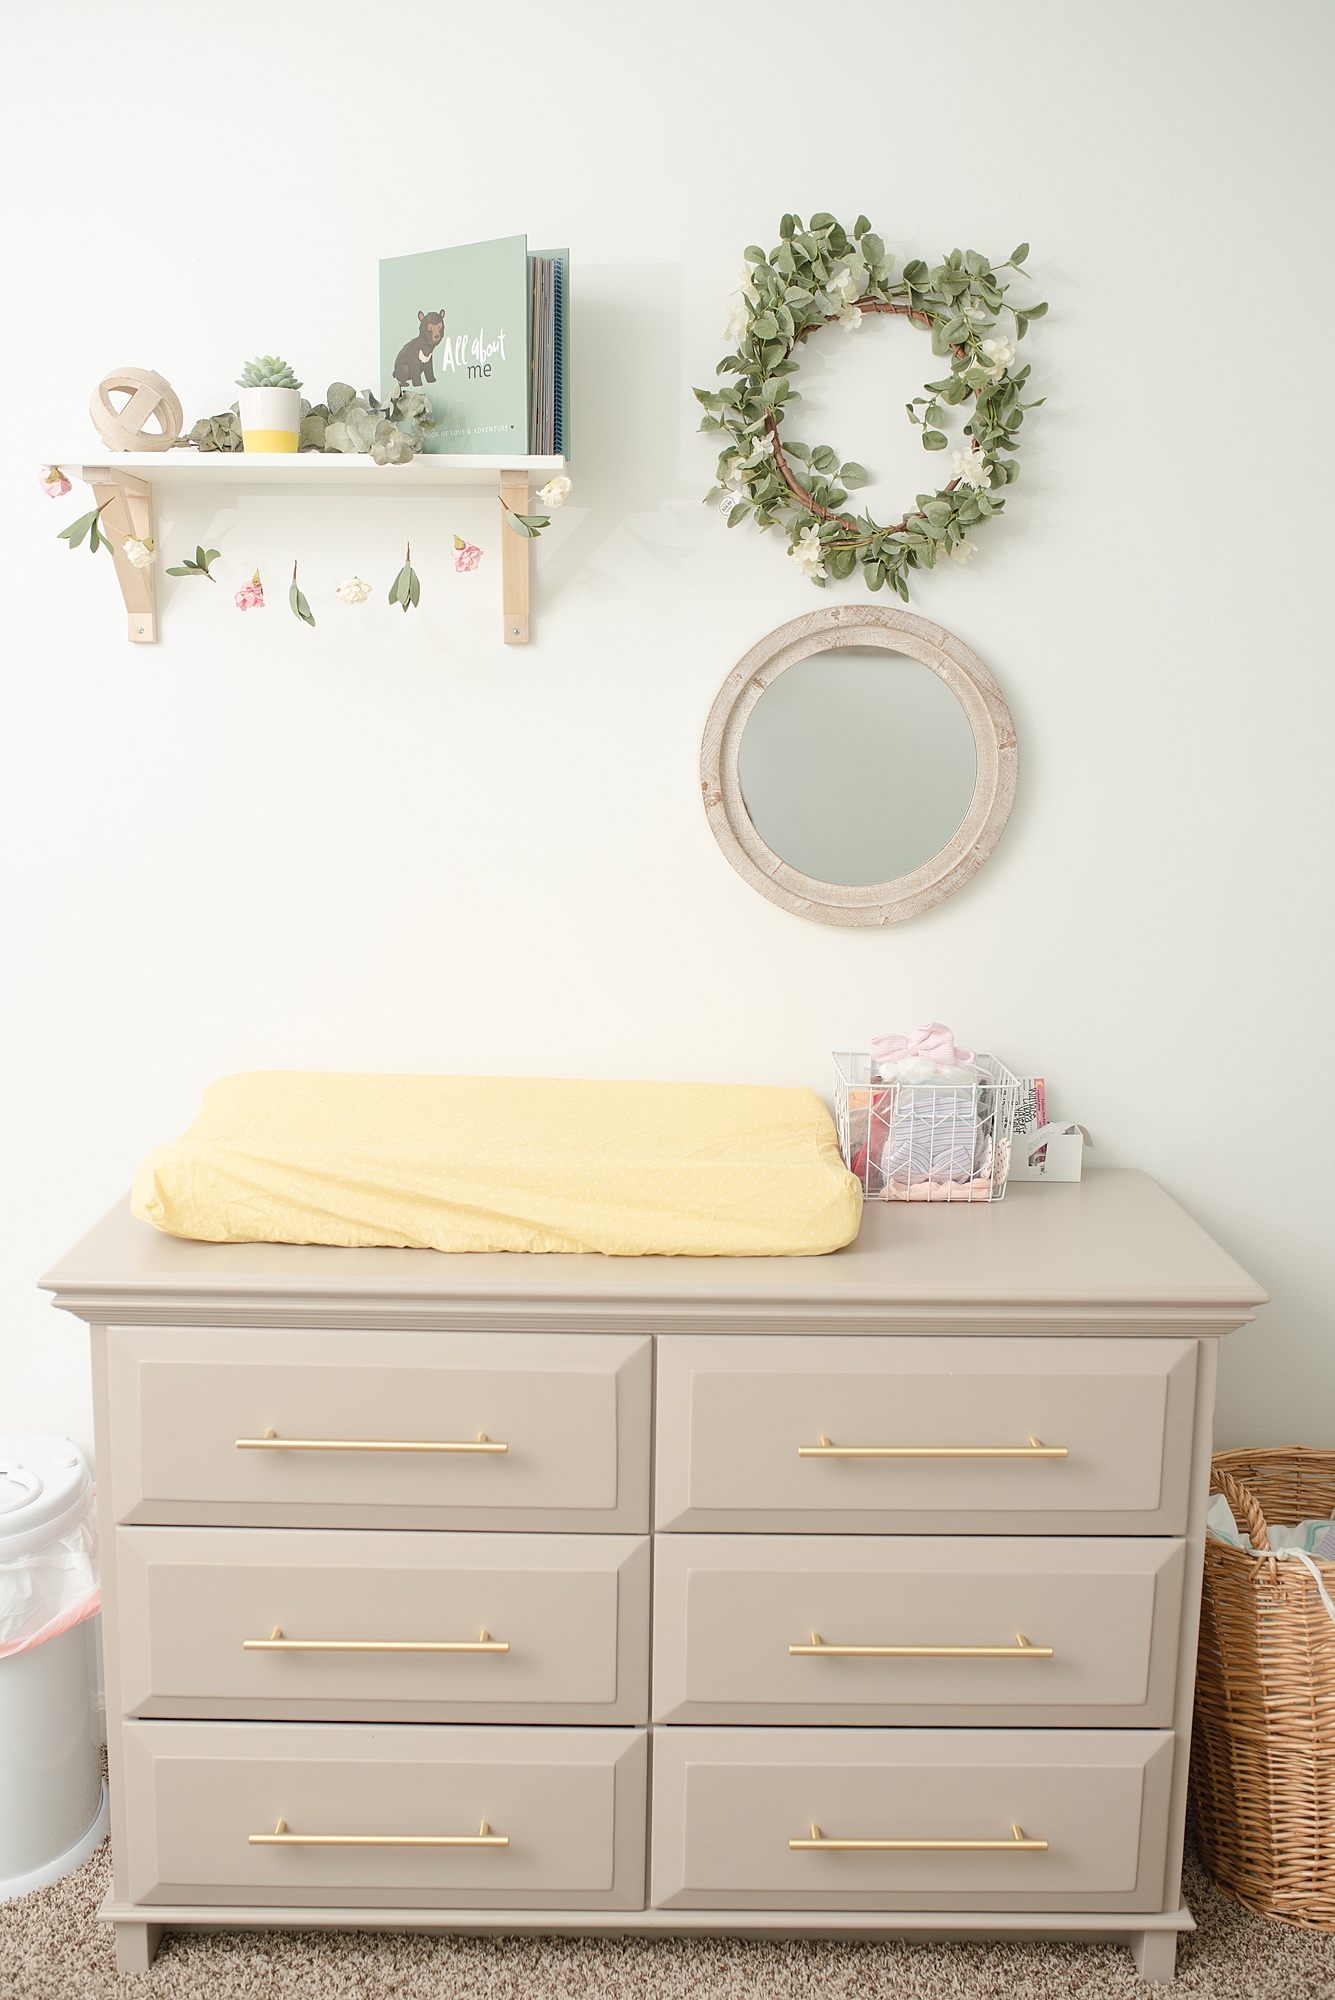 Modern Day Nursery Decor Details in a girls room a very gray changing table with a yellow changing pad and a green wreath above the changing table